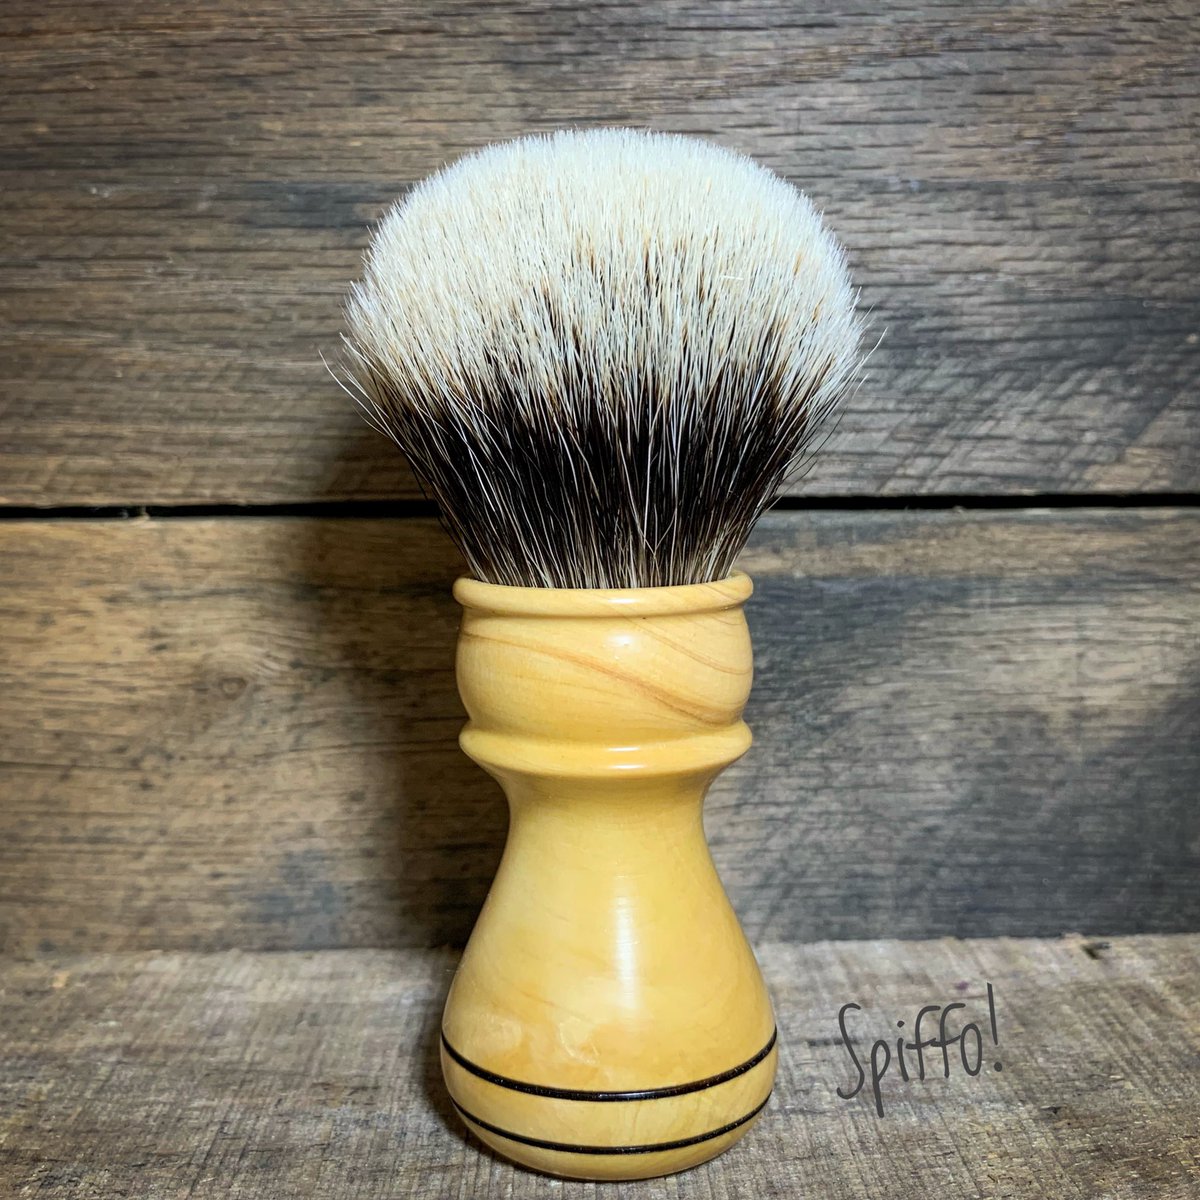 This beautiful Yellow Cedar handle of Fulgor, with its handcrafted shape and design, is topped with a 26mm Two-Band badger knot. Whadda ya think? 😎 #shavingbrush #shavebrush #spiffo #spiffoman #shaveoftheday #shaving #wetshaving #madeinhalifax #halifax #halifaxns #novascotia